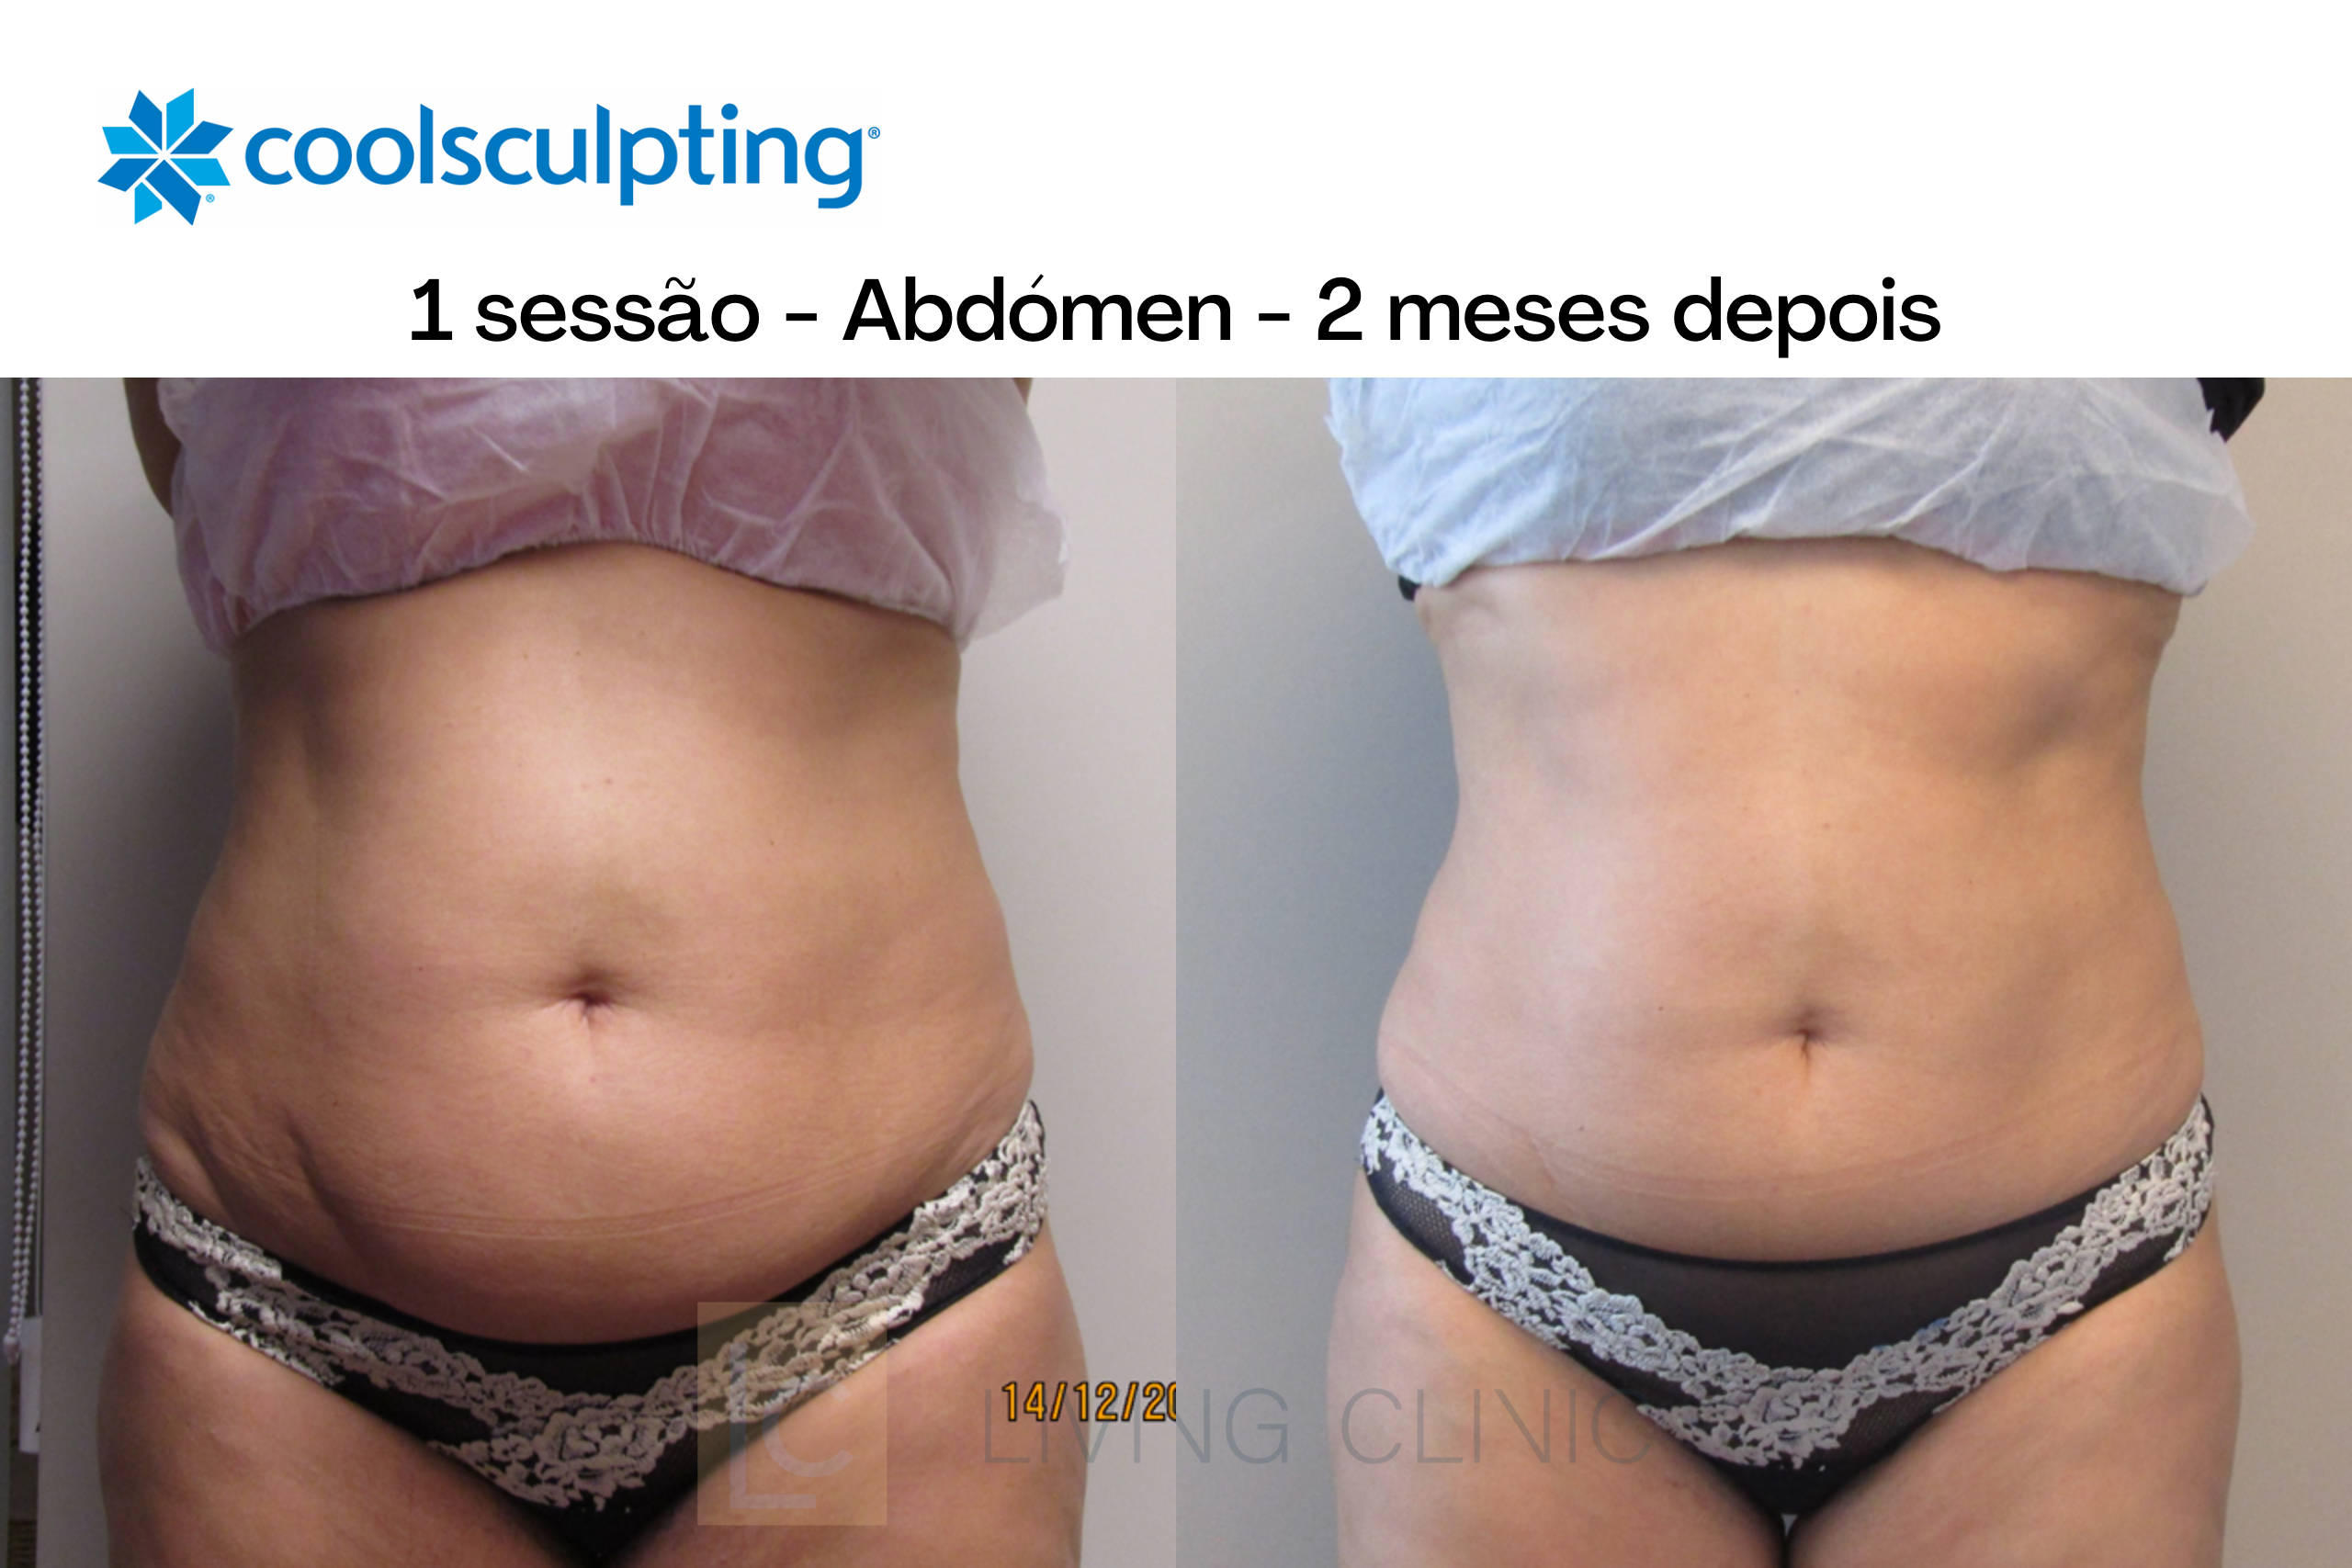 coolsculpting 2 meses depois